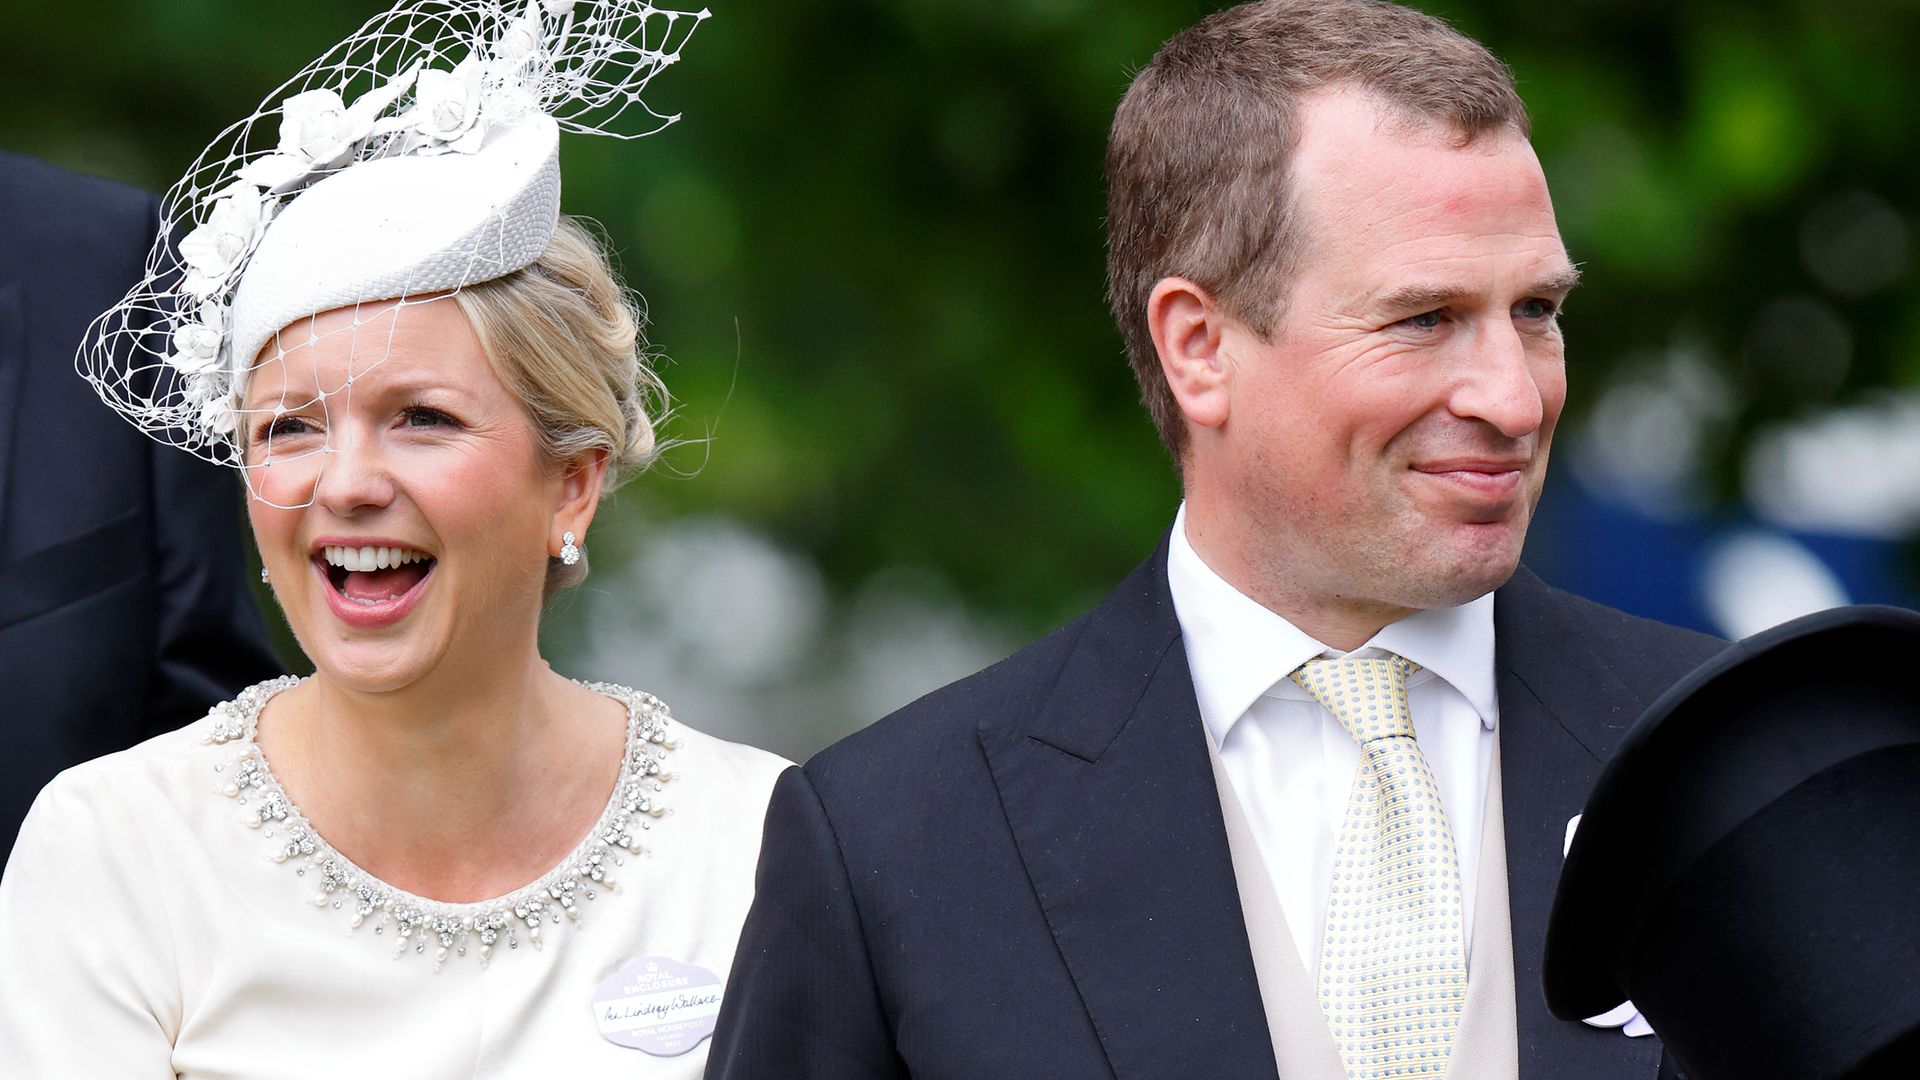 Lindsay Wallace is gorgeous in a white fascinator and dress as she joins Peter Phillips at Royal Ascot